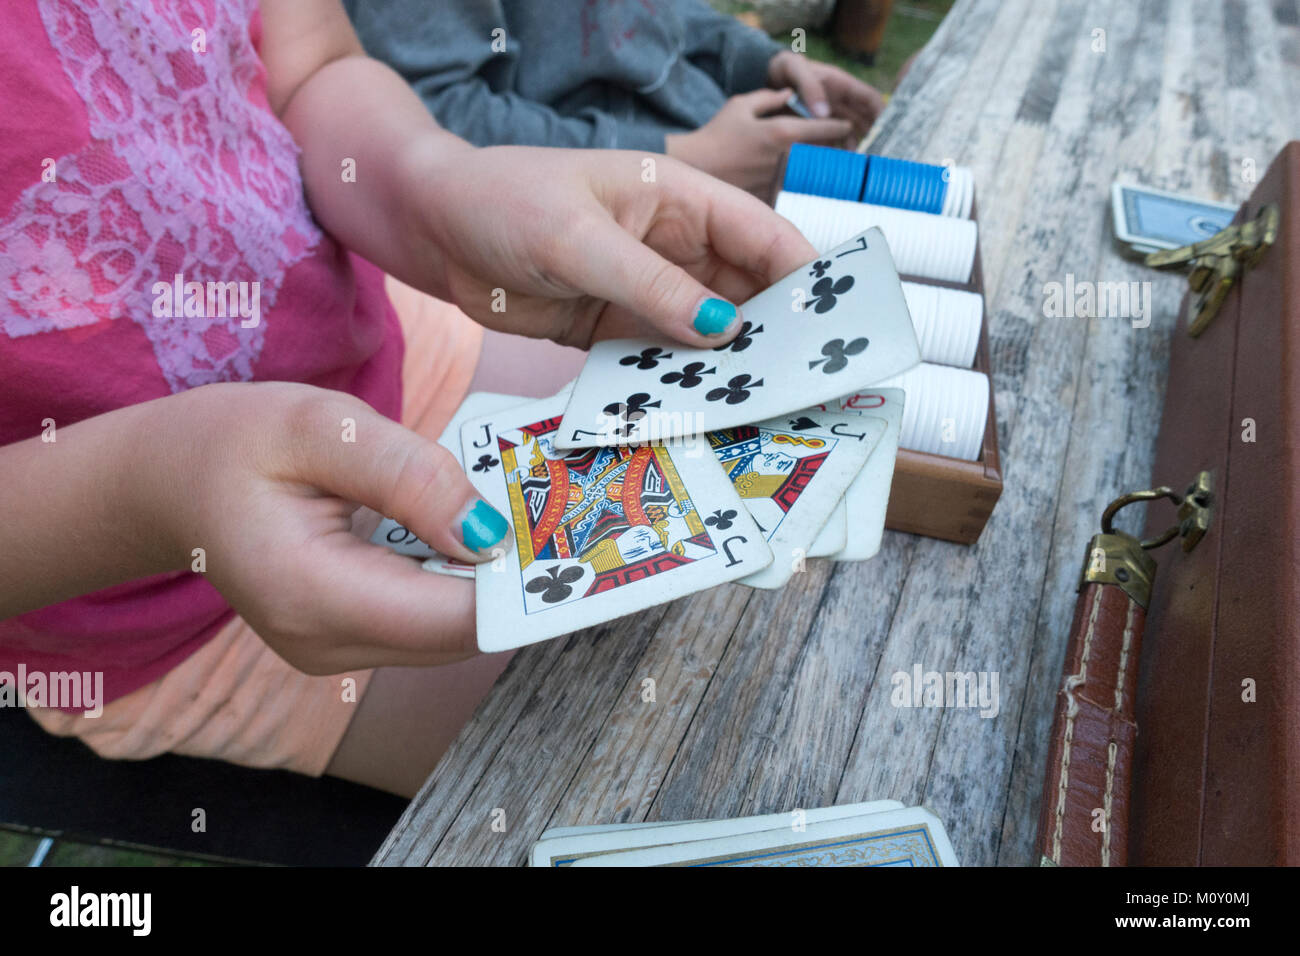 Looks like a pair of Jacks in a poker hand of a young girl with turquoise painted nails. Clitherall Minnesota MN USA Stock Photo